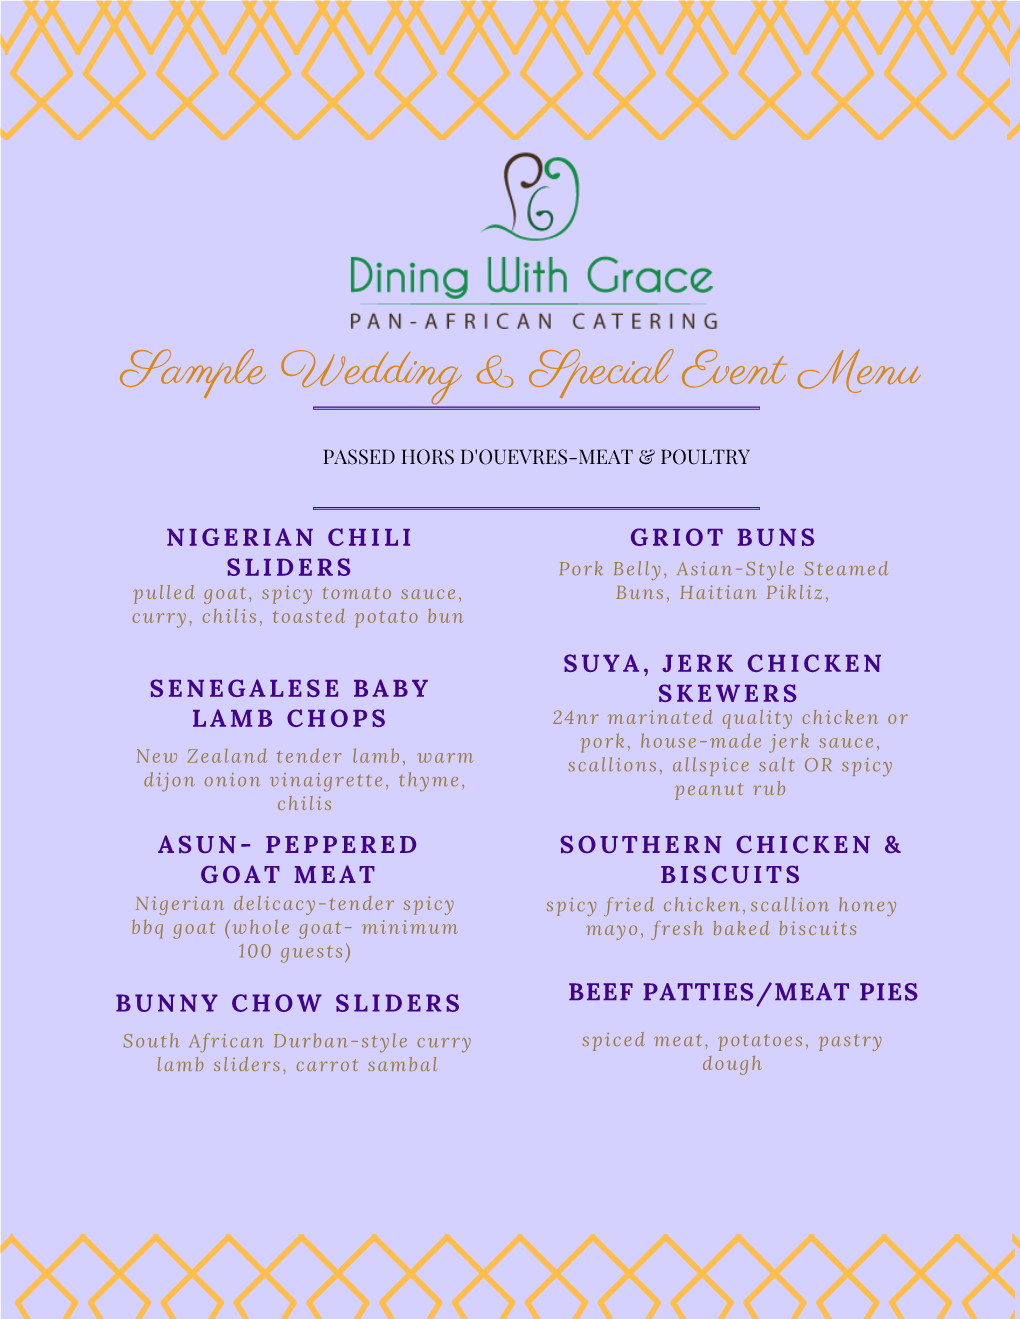 Dining with Grace Wedding Brochure